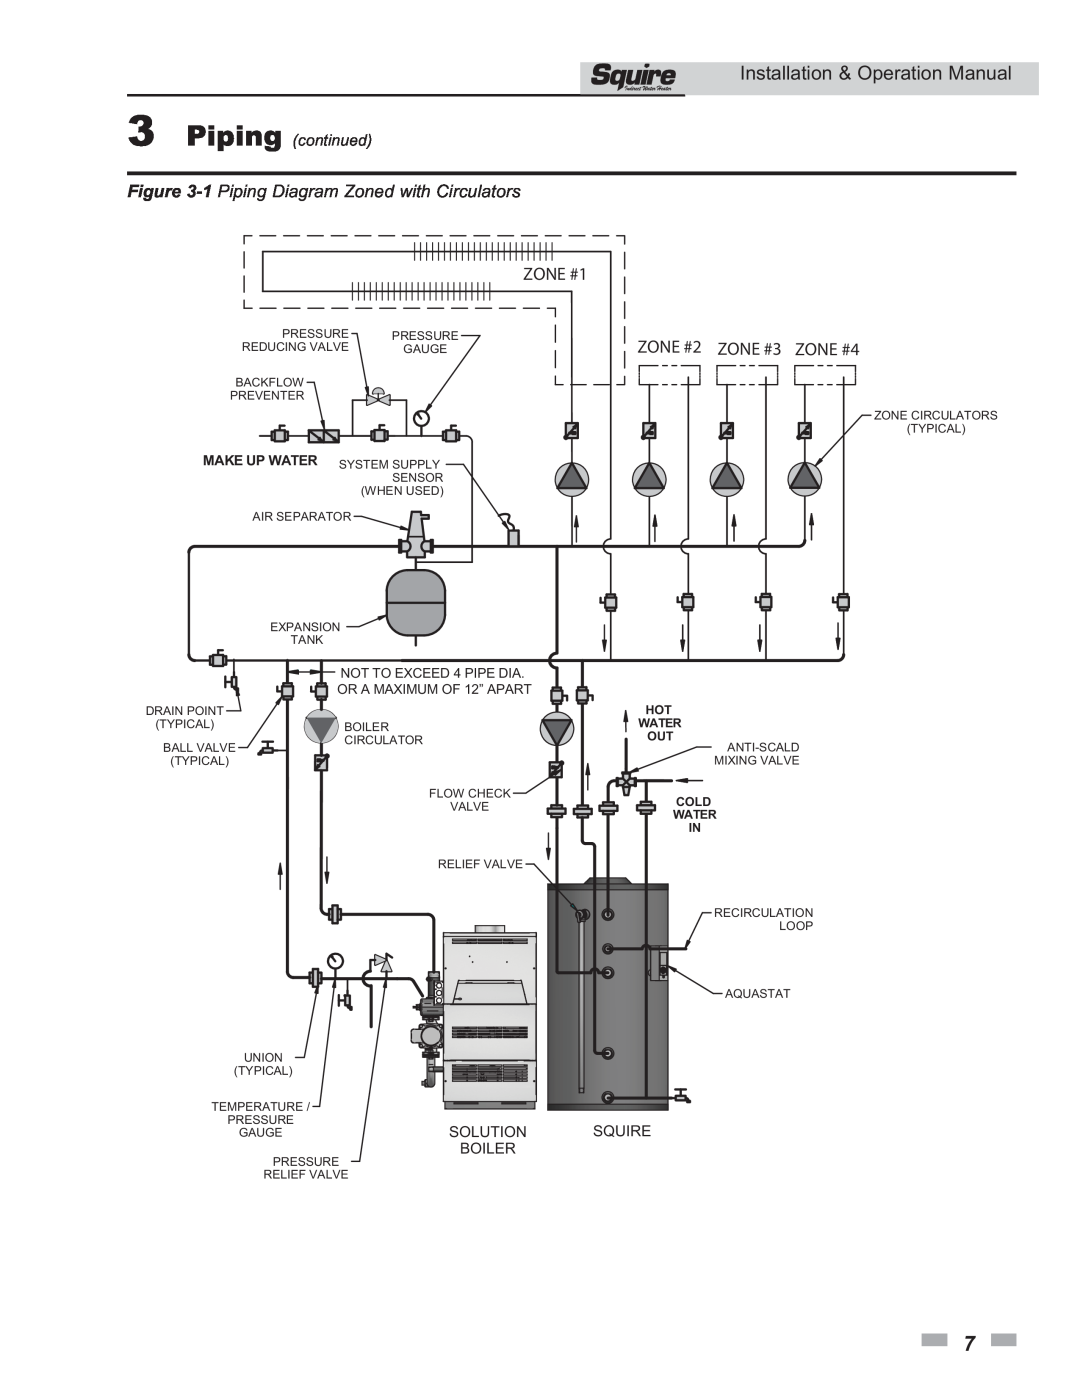 Lochinvar SSS041 1 Piping Diagram Zoned with Circulators, 3Piping continued, Solution, Boiler, Squire, Make Up Water 